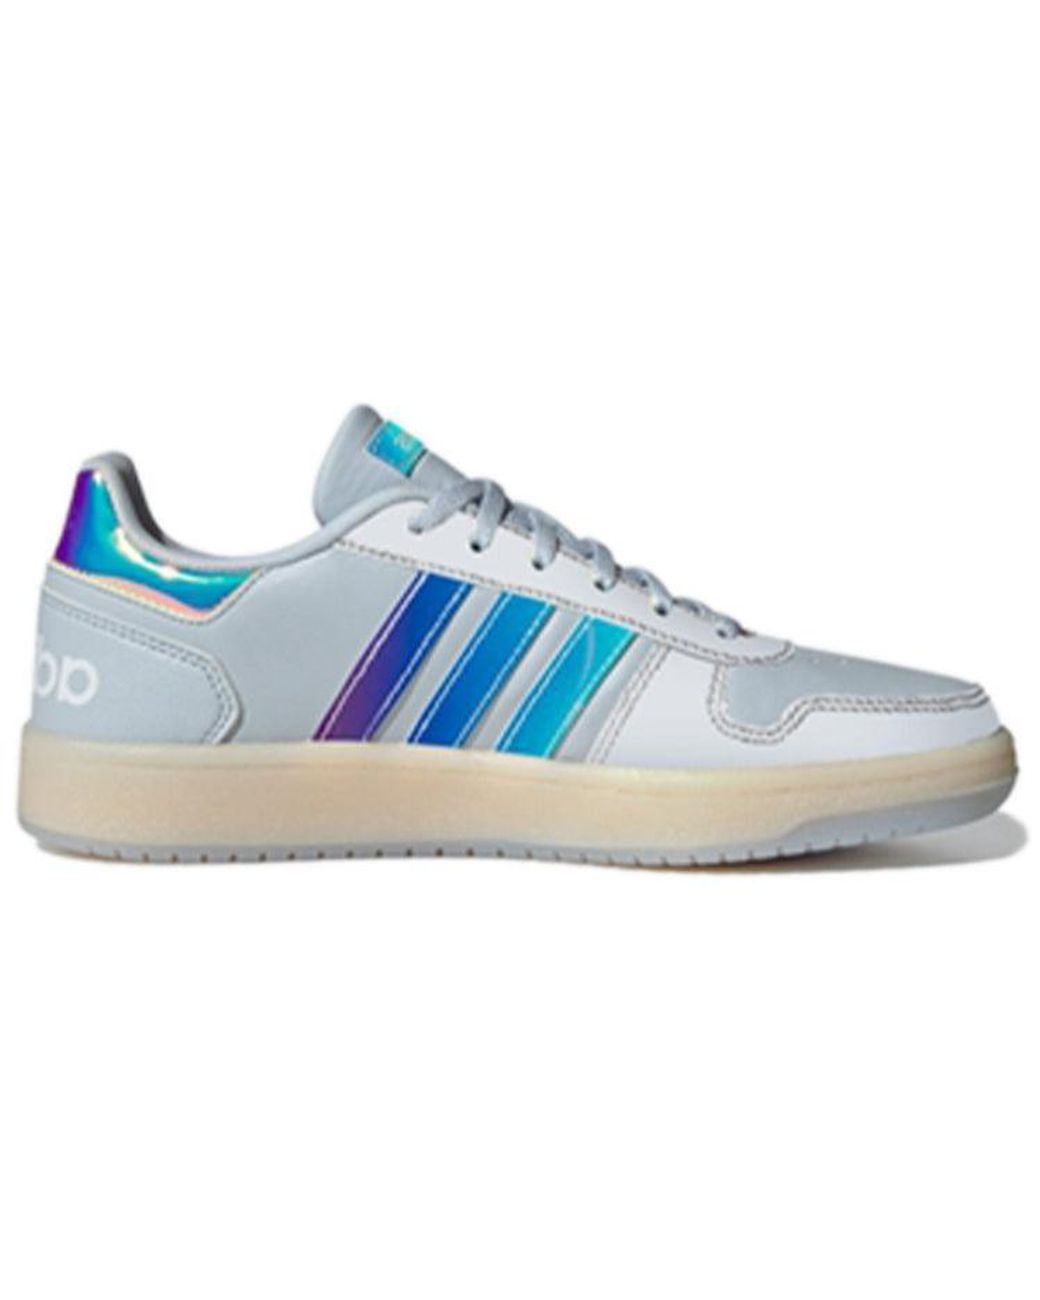 Adidas Neo Hoops 2.0 For Blue/white | Lyst